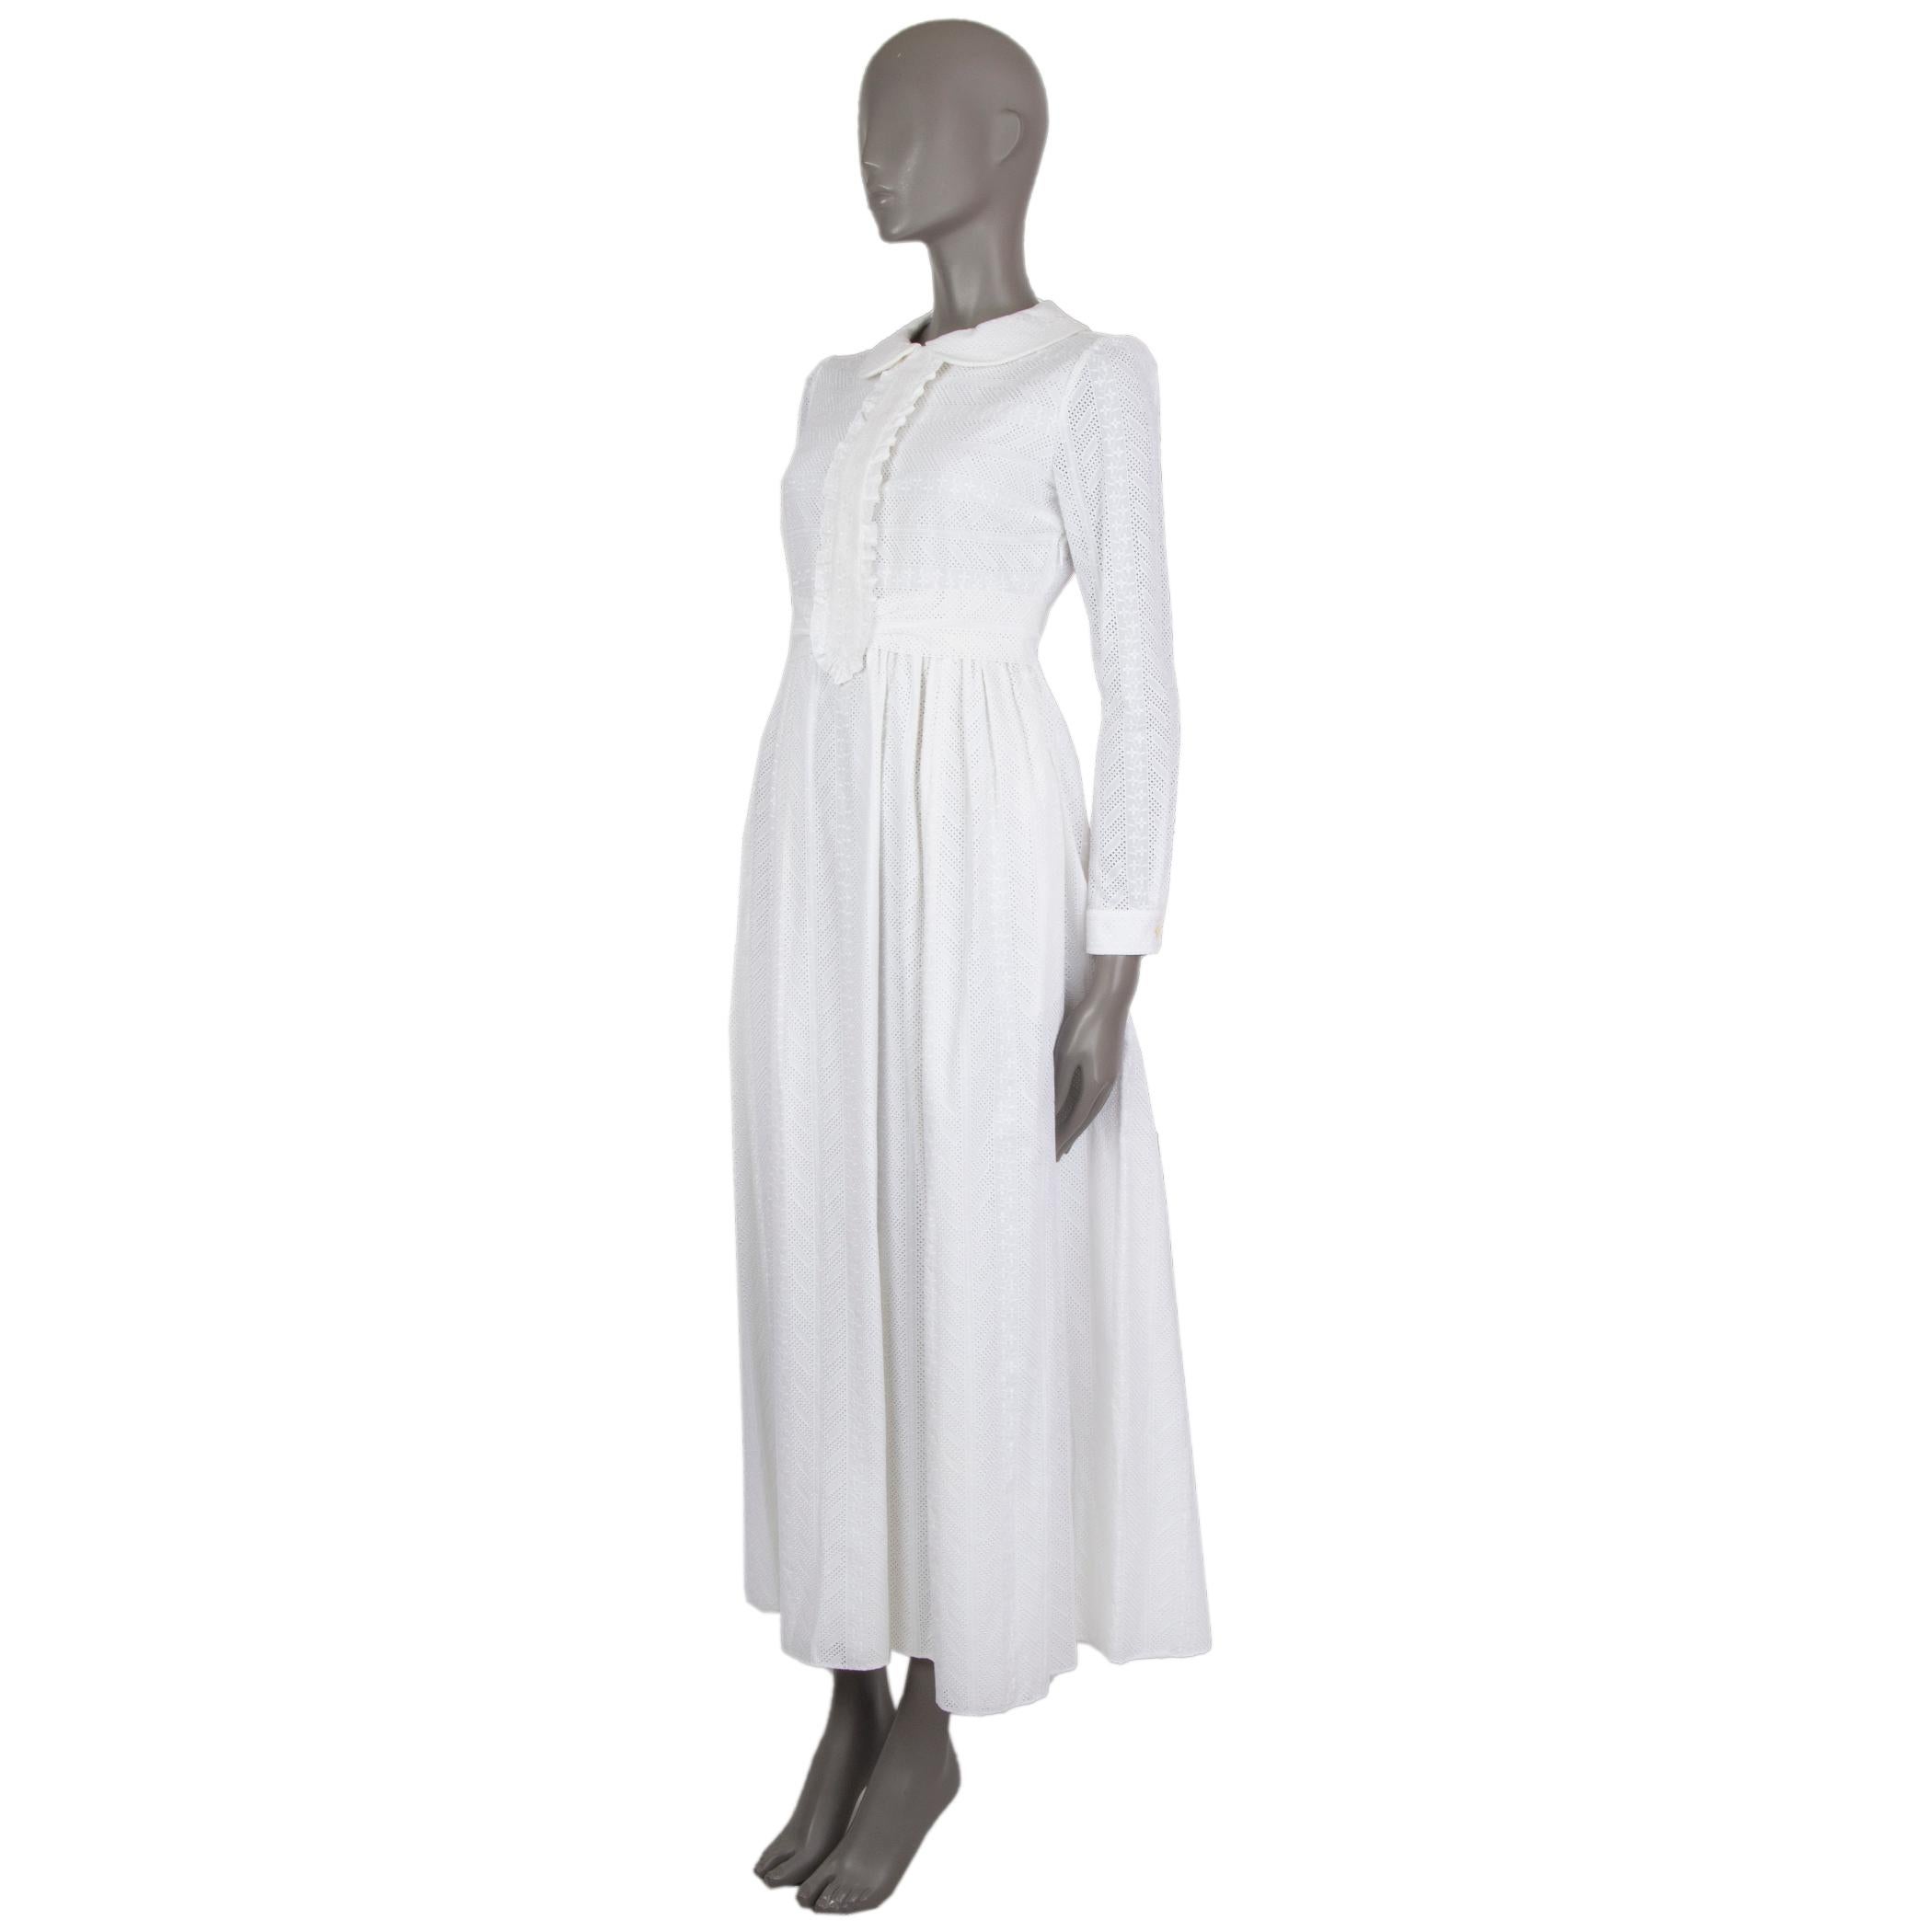 Saint Laurent long-sleeve 'Broderie Anglaise' maxi dress in off.white cotton. With Peter-Pan collar, ruffled panel on the front, attached waistband, pleated skirt, and one-button square cuffs. Closes with concealed buttons on the front, invisible